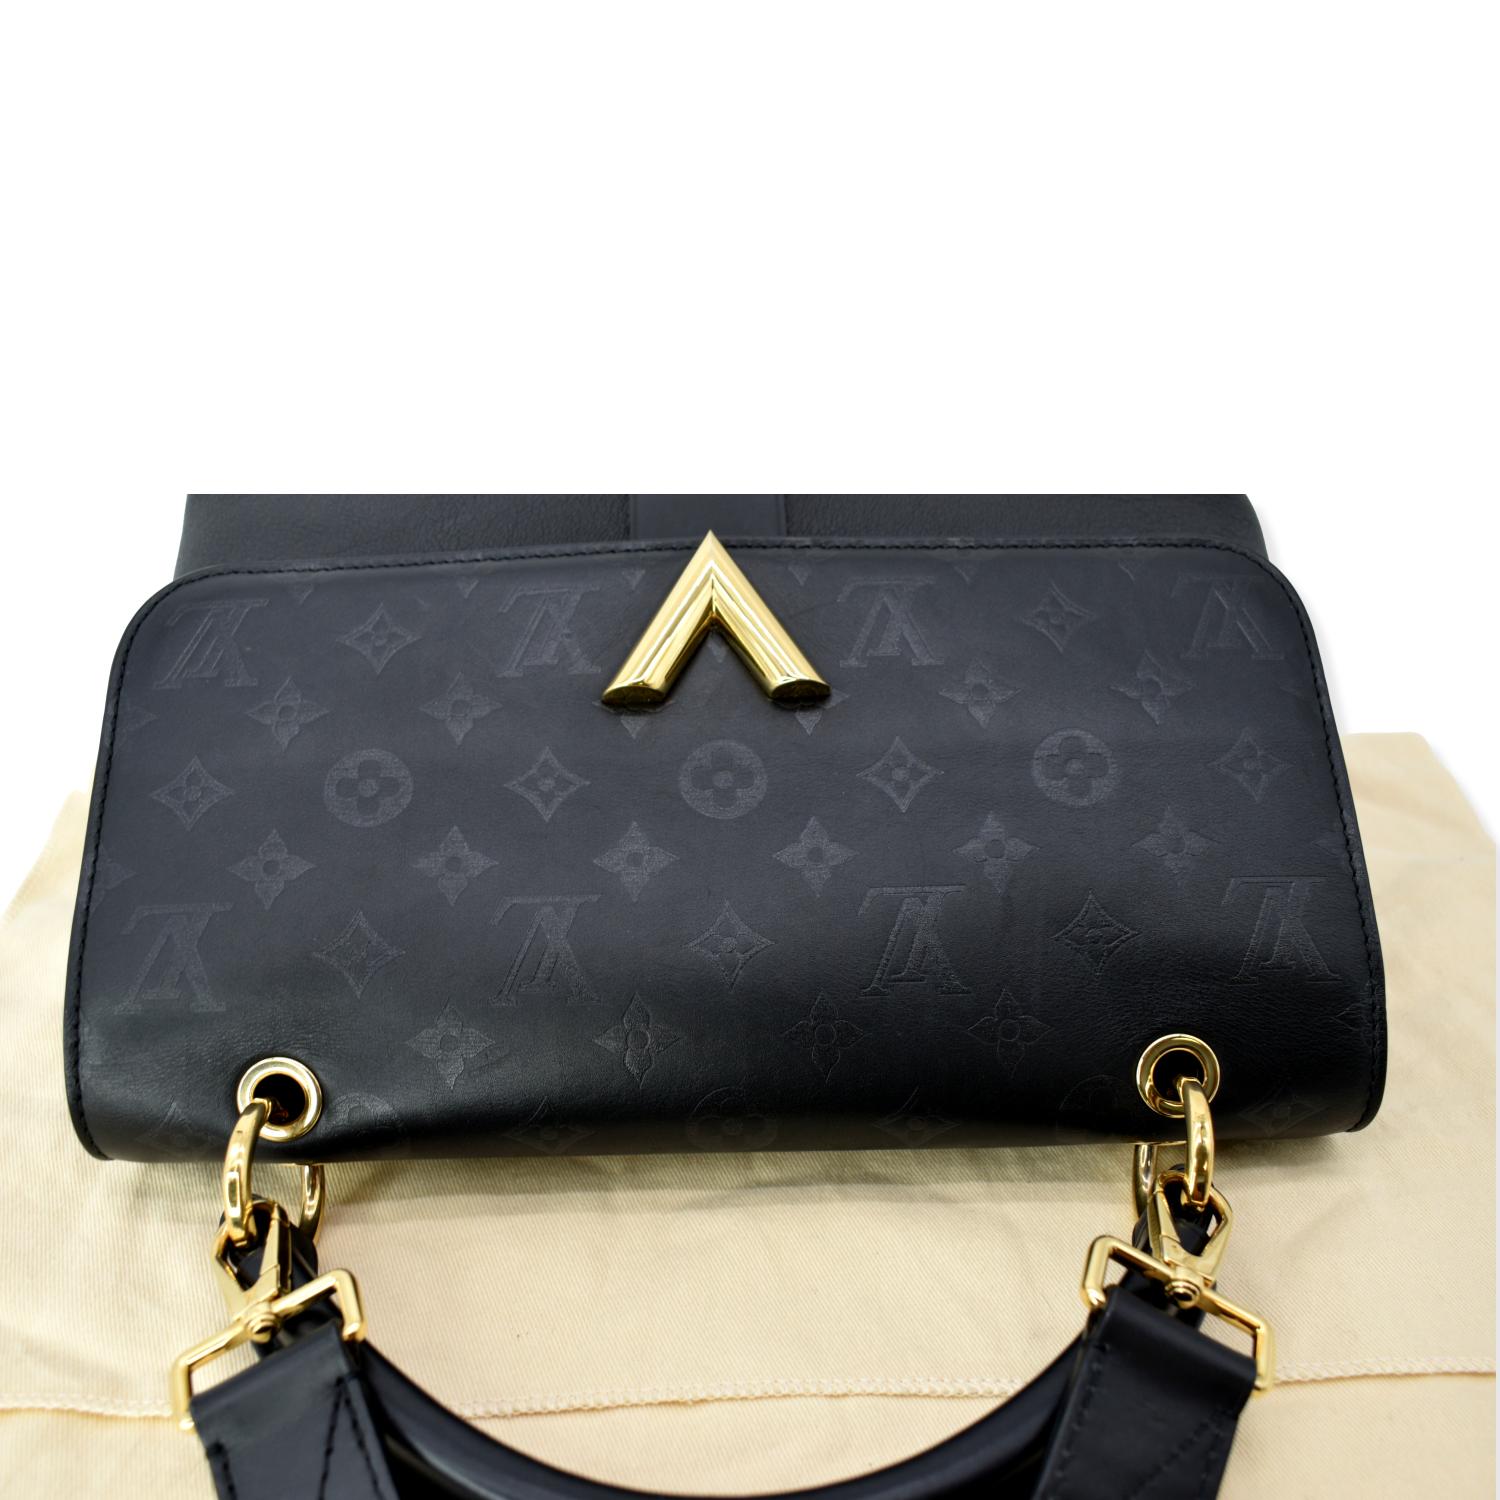 Louis+Vuitton+Very+One+Handle+Top+Handle+Bag+Black+Leather for